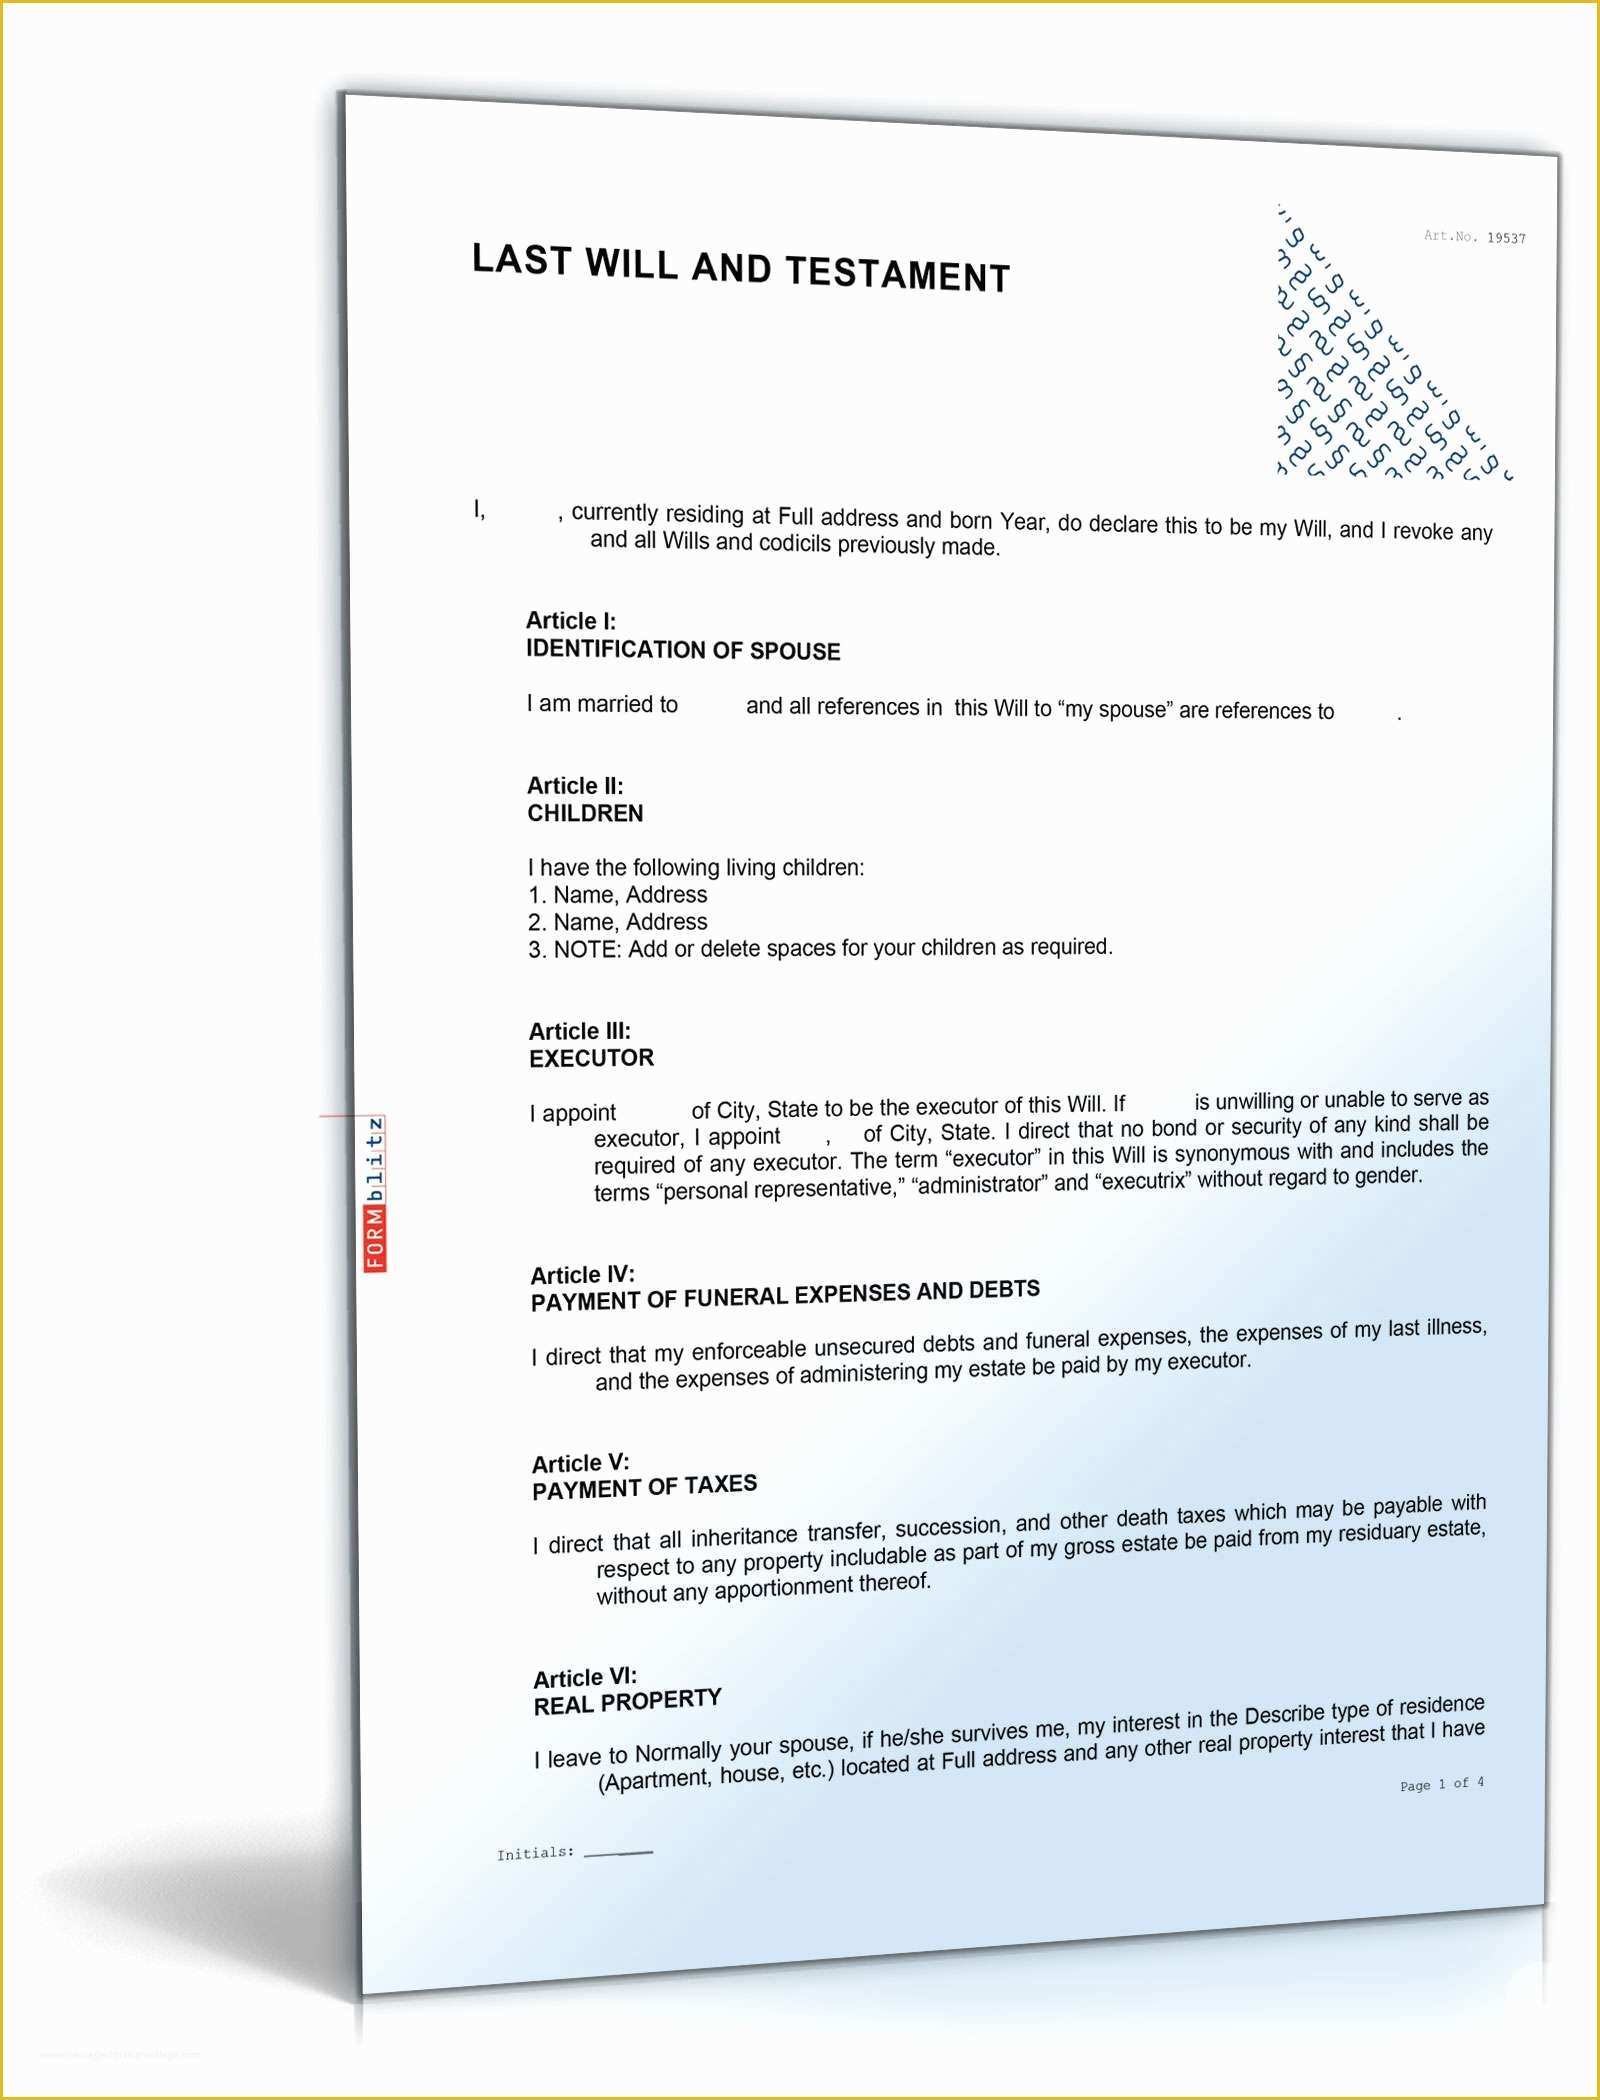 Last Will and Testament Texas Free Template Of Texas Last Will and Testament Quickly Blank Direct to